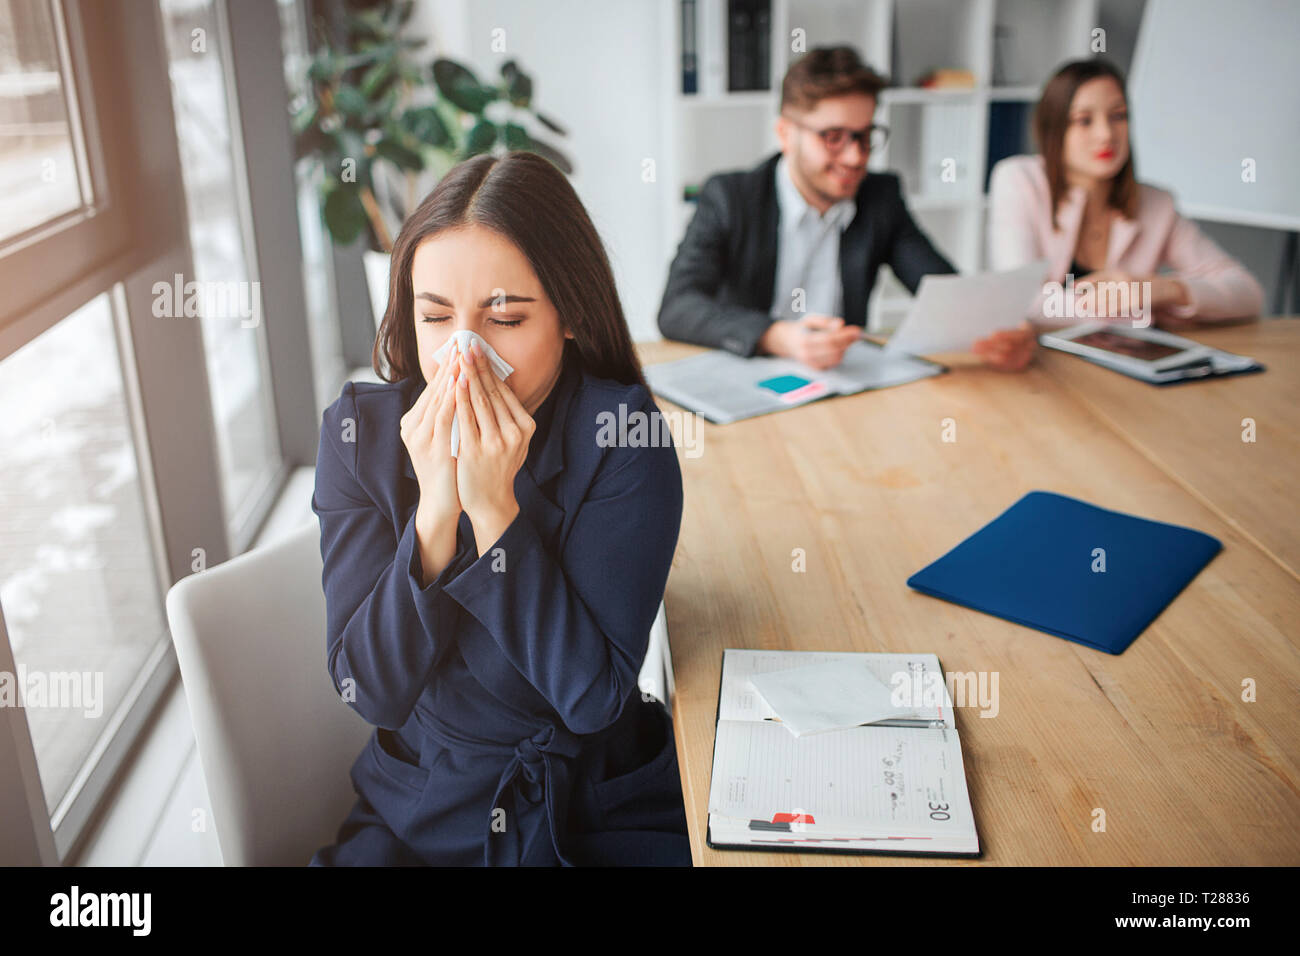 Sick young woman sit saparately at table in meeting room and sneezing. She hold white napkin. Her colleagues work behind Stock Photo